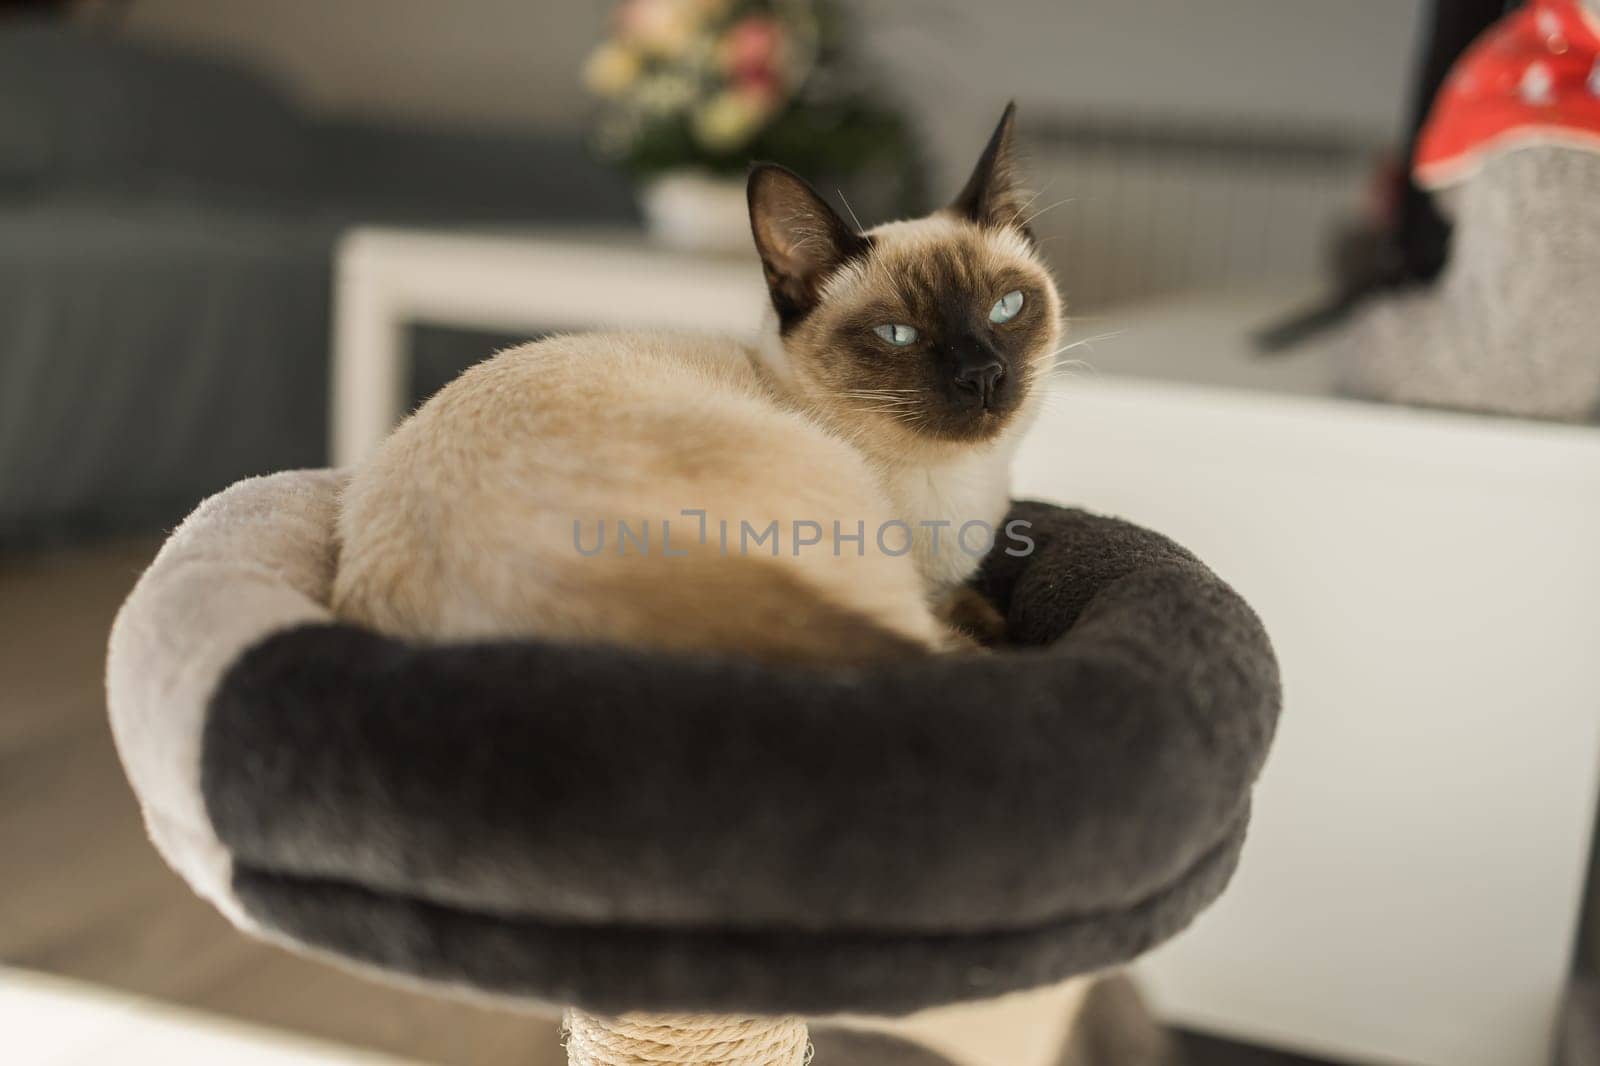 Small siamese cat sleeping on her cat's bed with soft cozy environment. Pet concept by Satura86